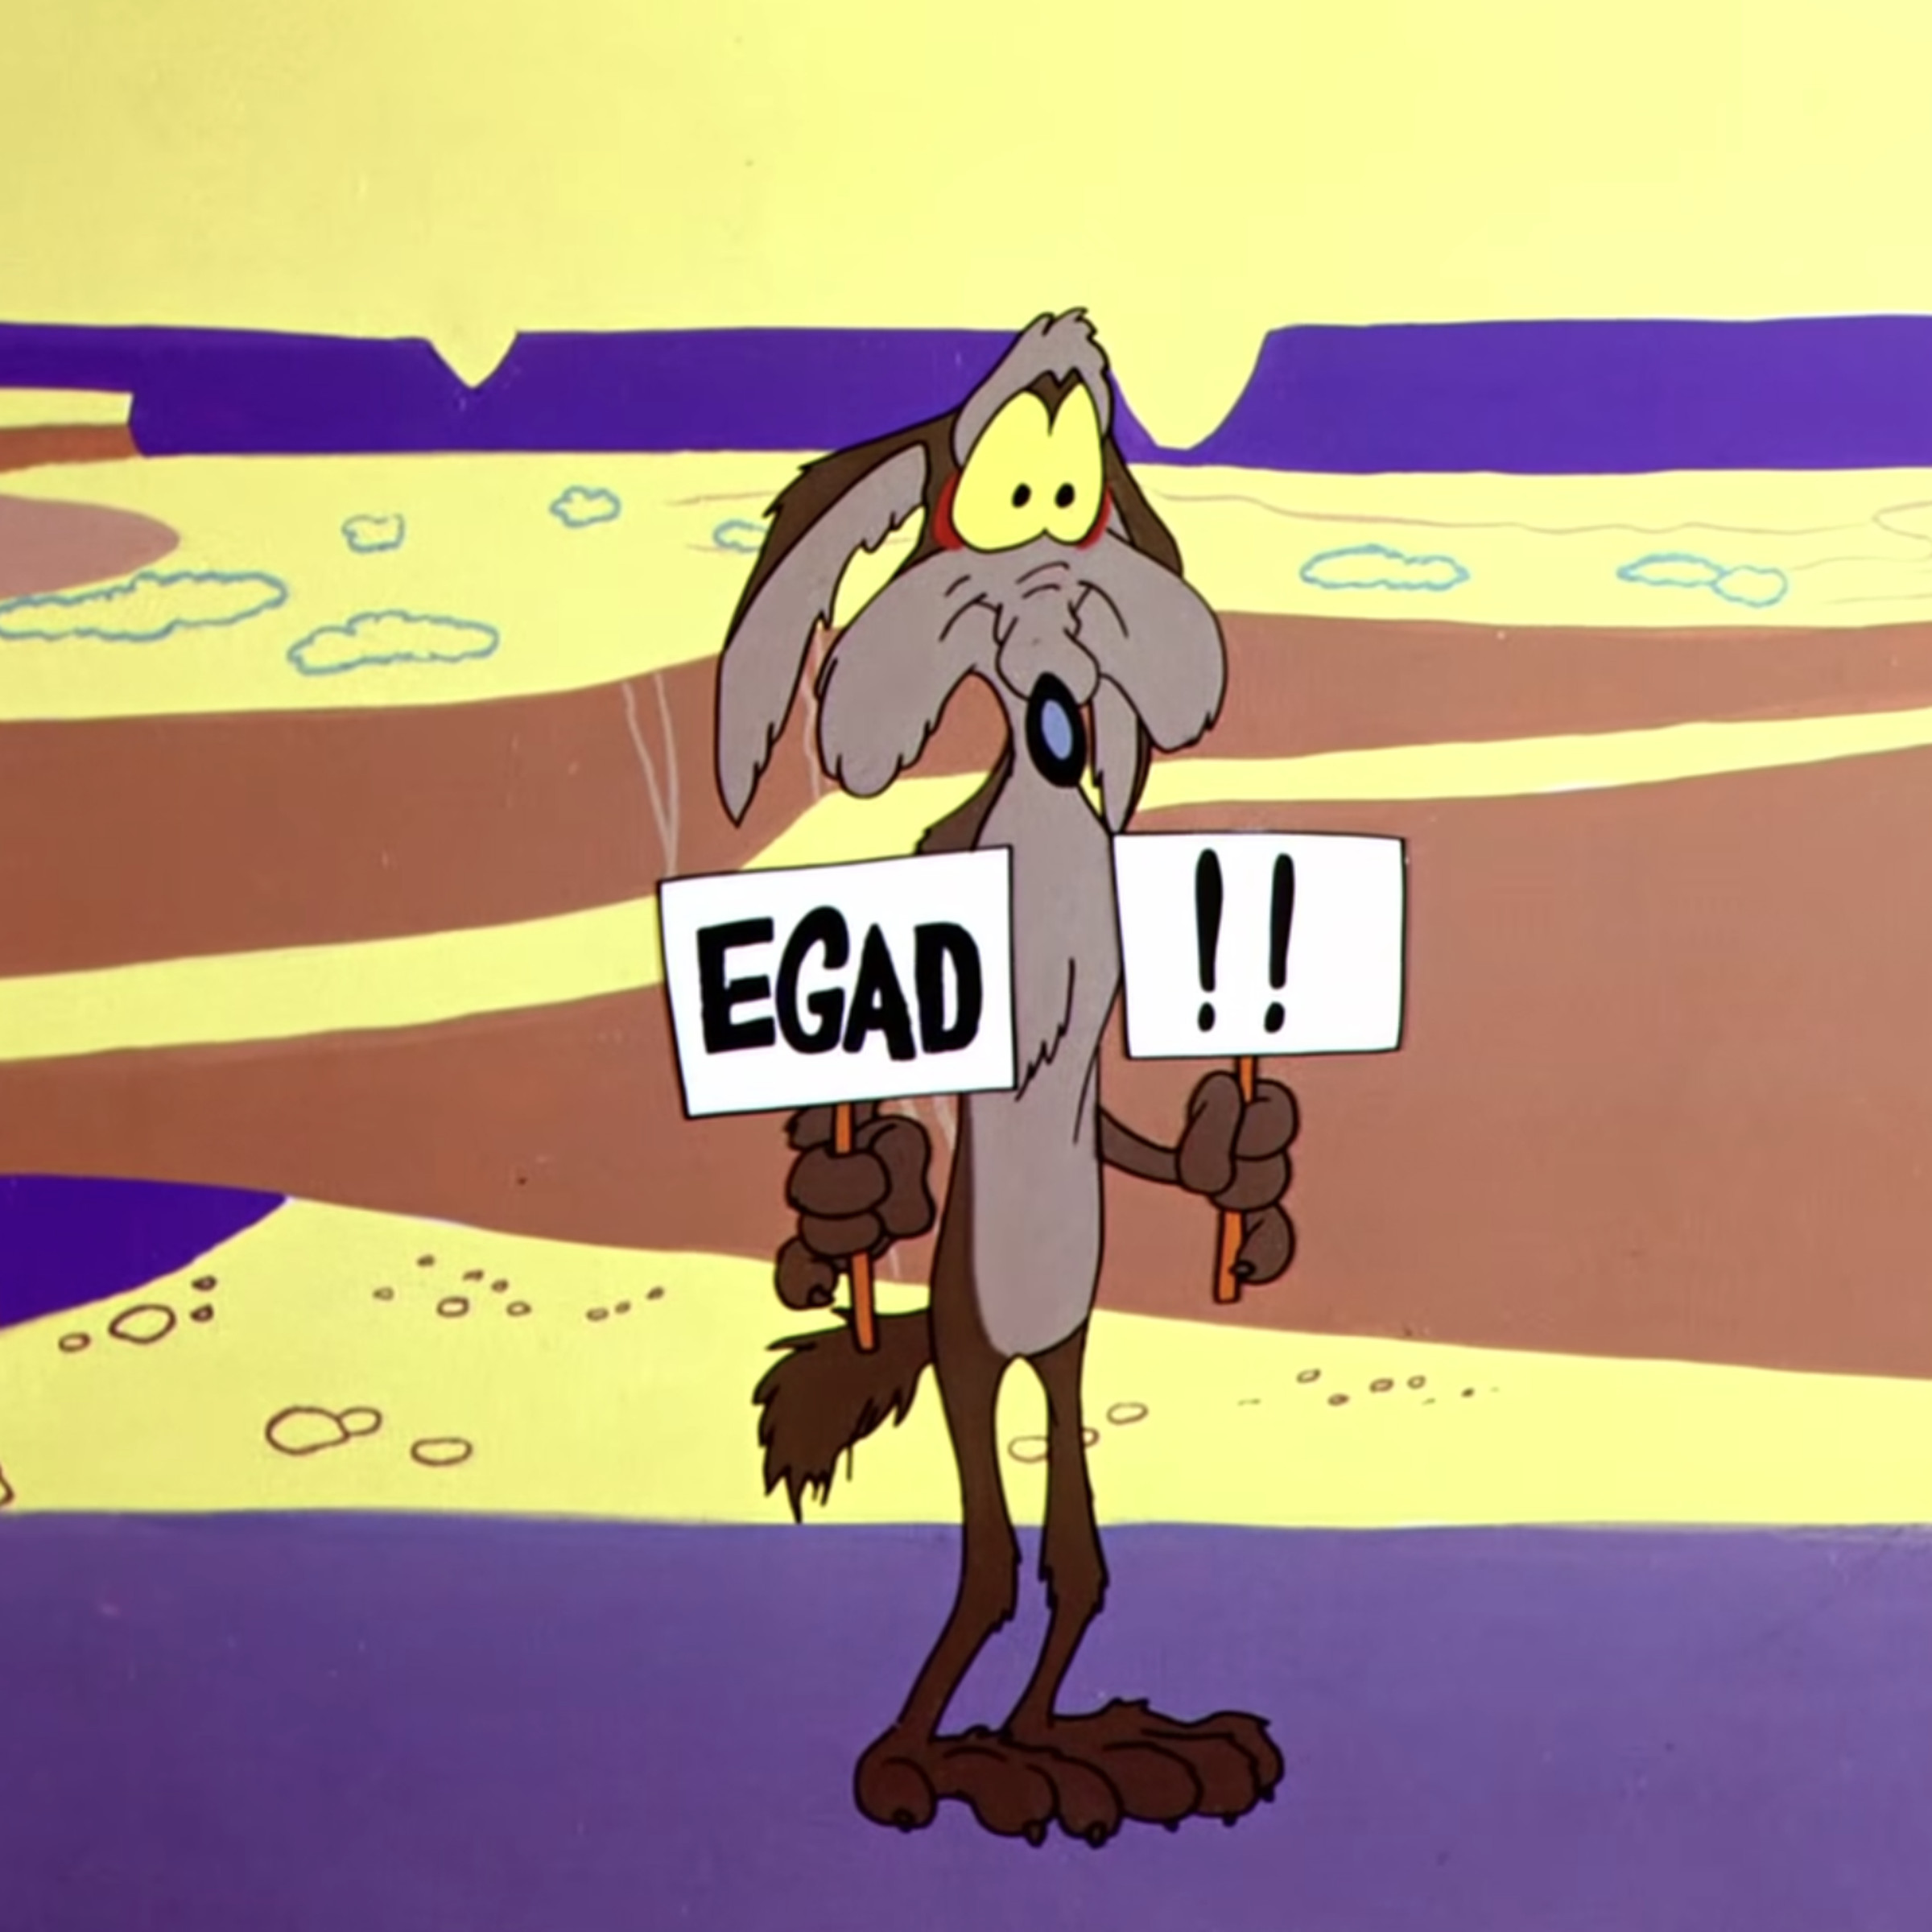 A cartoon coyote standing on hind legs and holding two signs: one that reads “EGAD,” and the other that has two exclamation points on it.